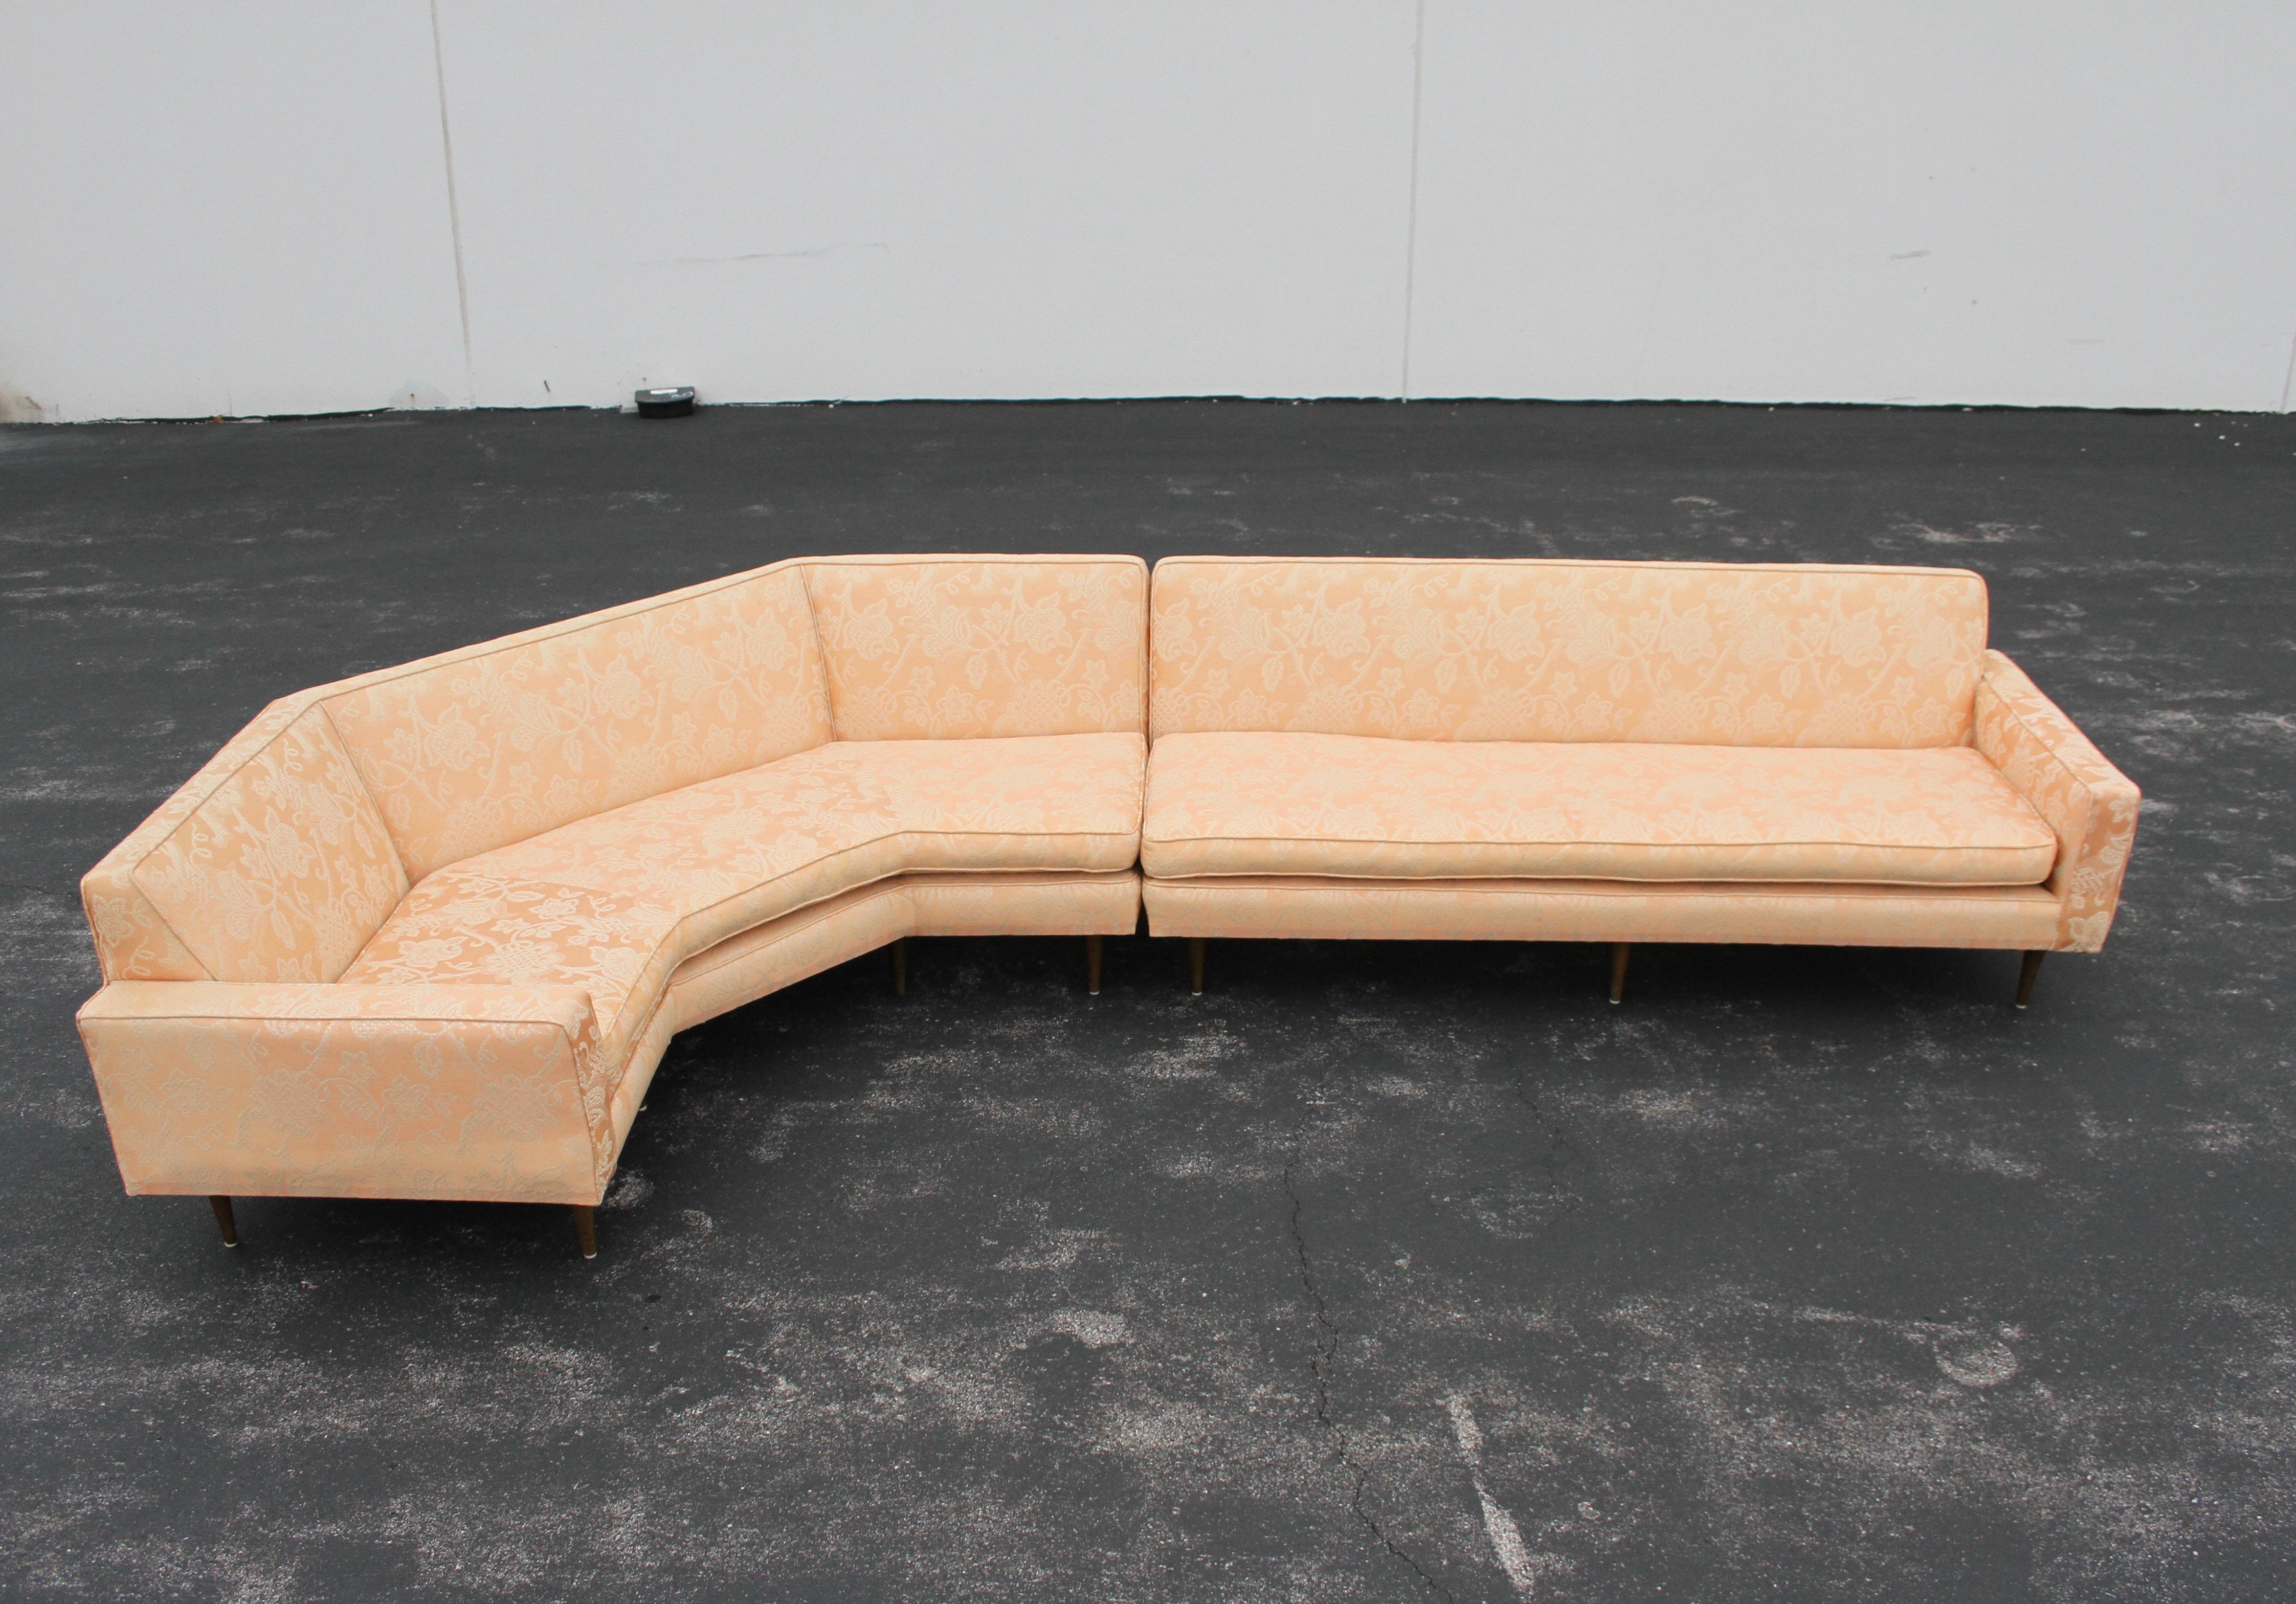 Mid-Century Modern 2-piece sectional sofa designed by Harvey Probber for his Nuclear Sert line. From one owner estate, older coral floral re-upholstery, is in need of re-upholstery, on original tapered magohany legs. Structurally sound, foam is